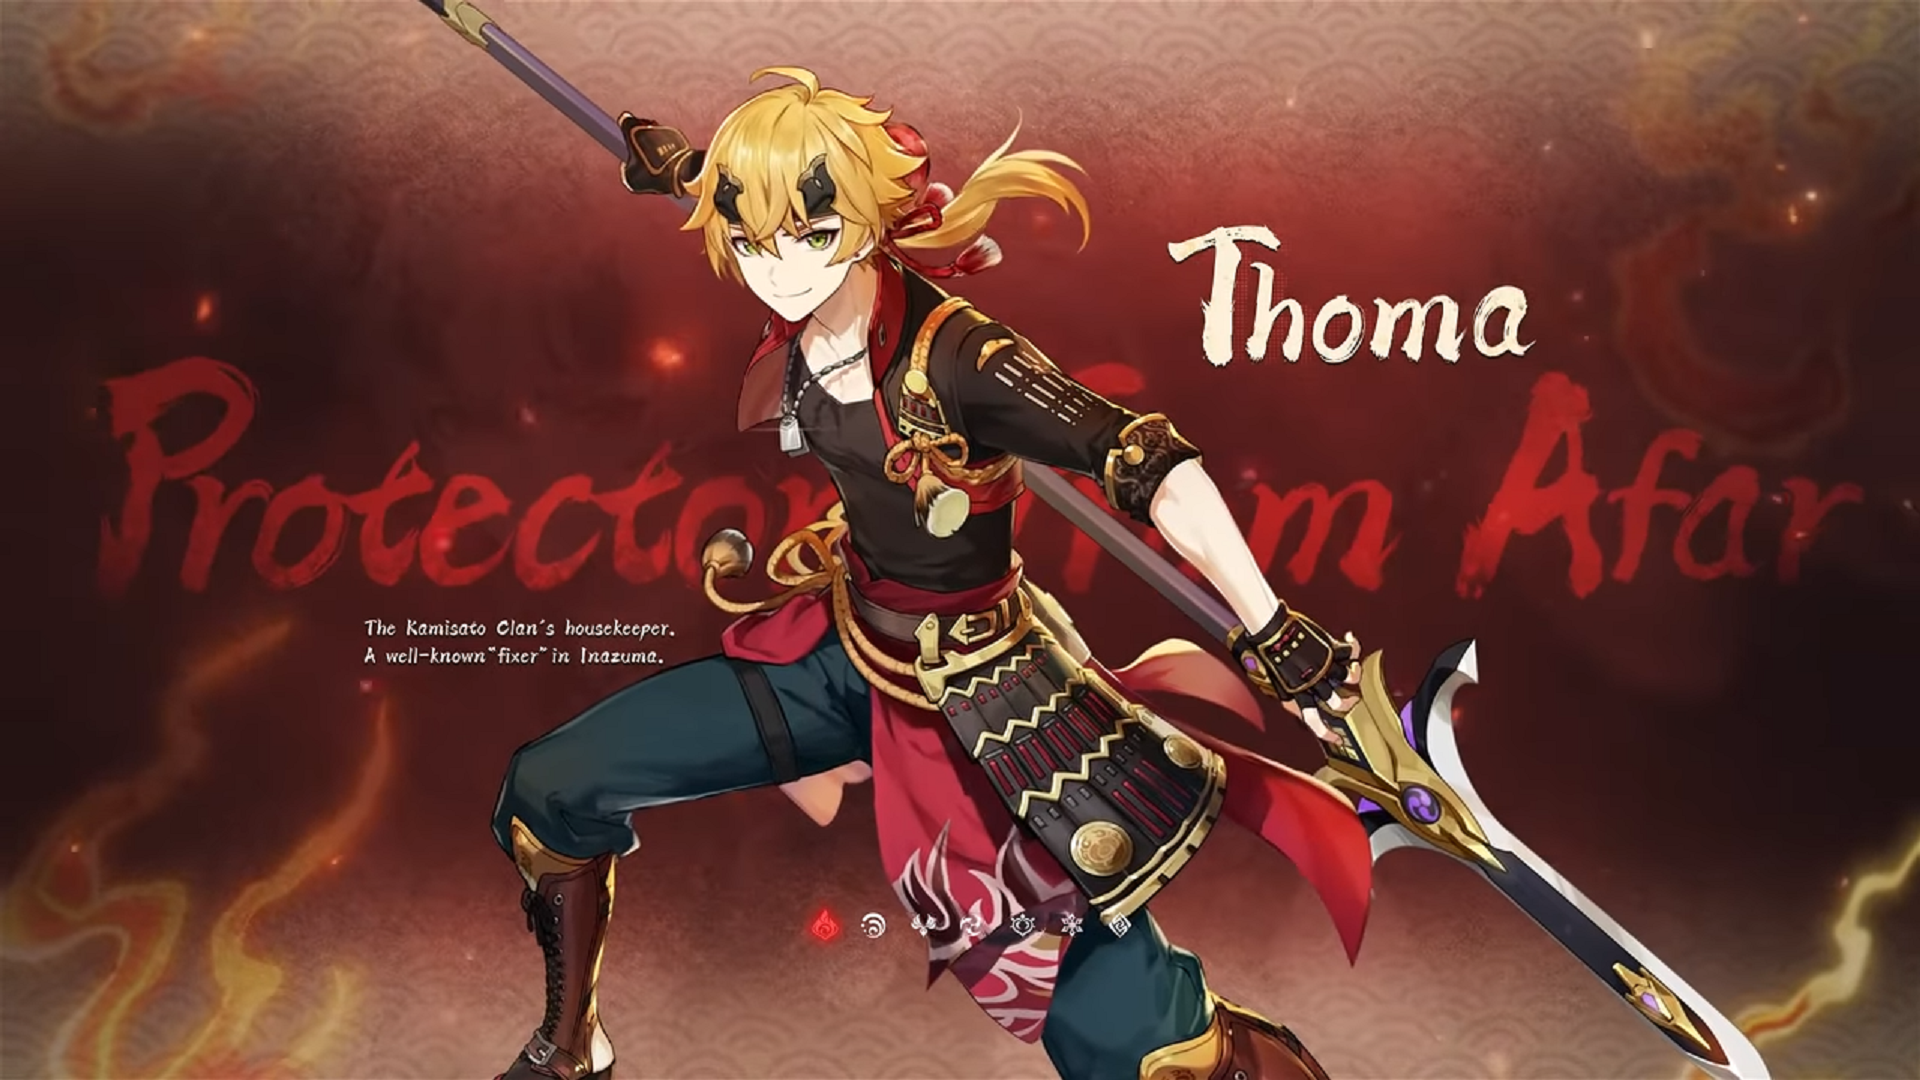 Thoma's character intro card from Genshin Impact. Text in image reads: "Protector from afar. The Kamisato clan's housekeeper. A well-known 'fixer' in Inazuma."